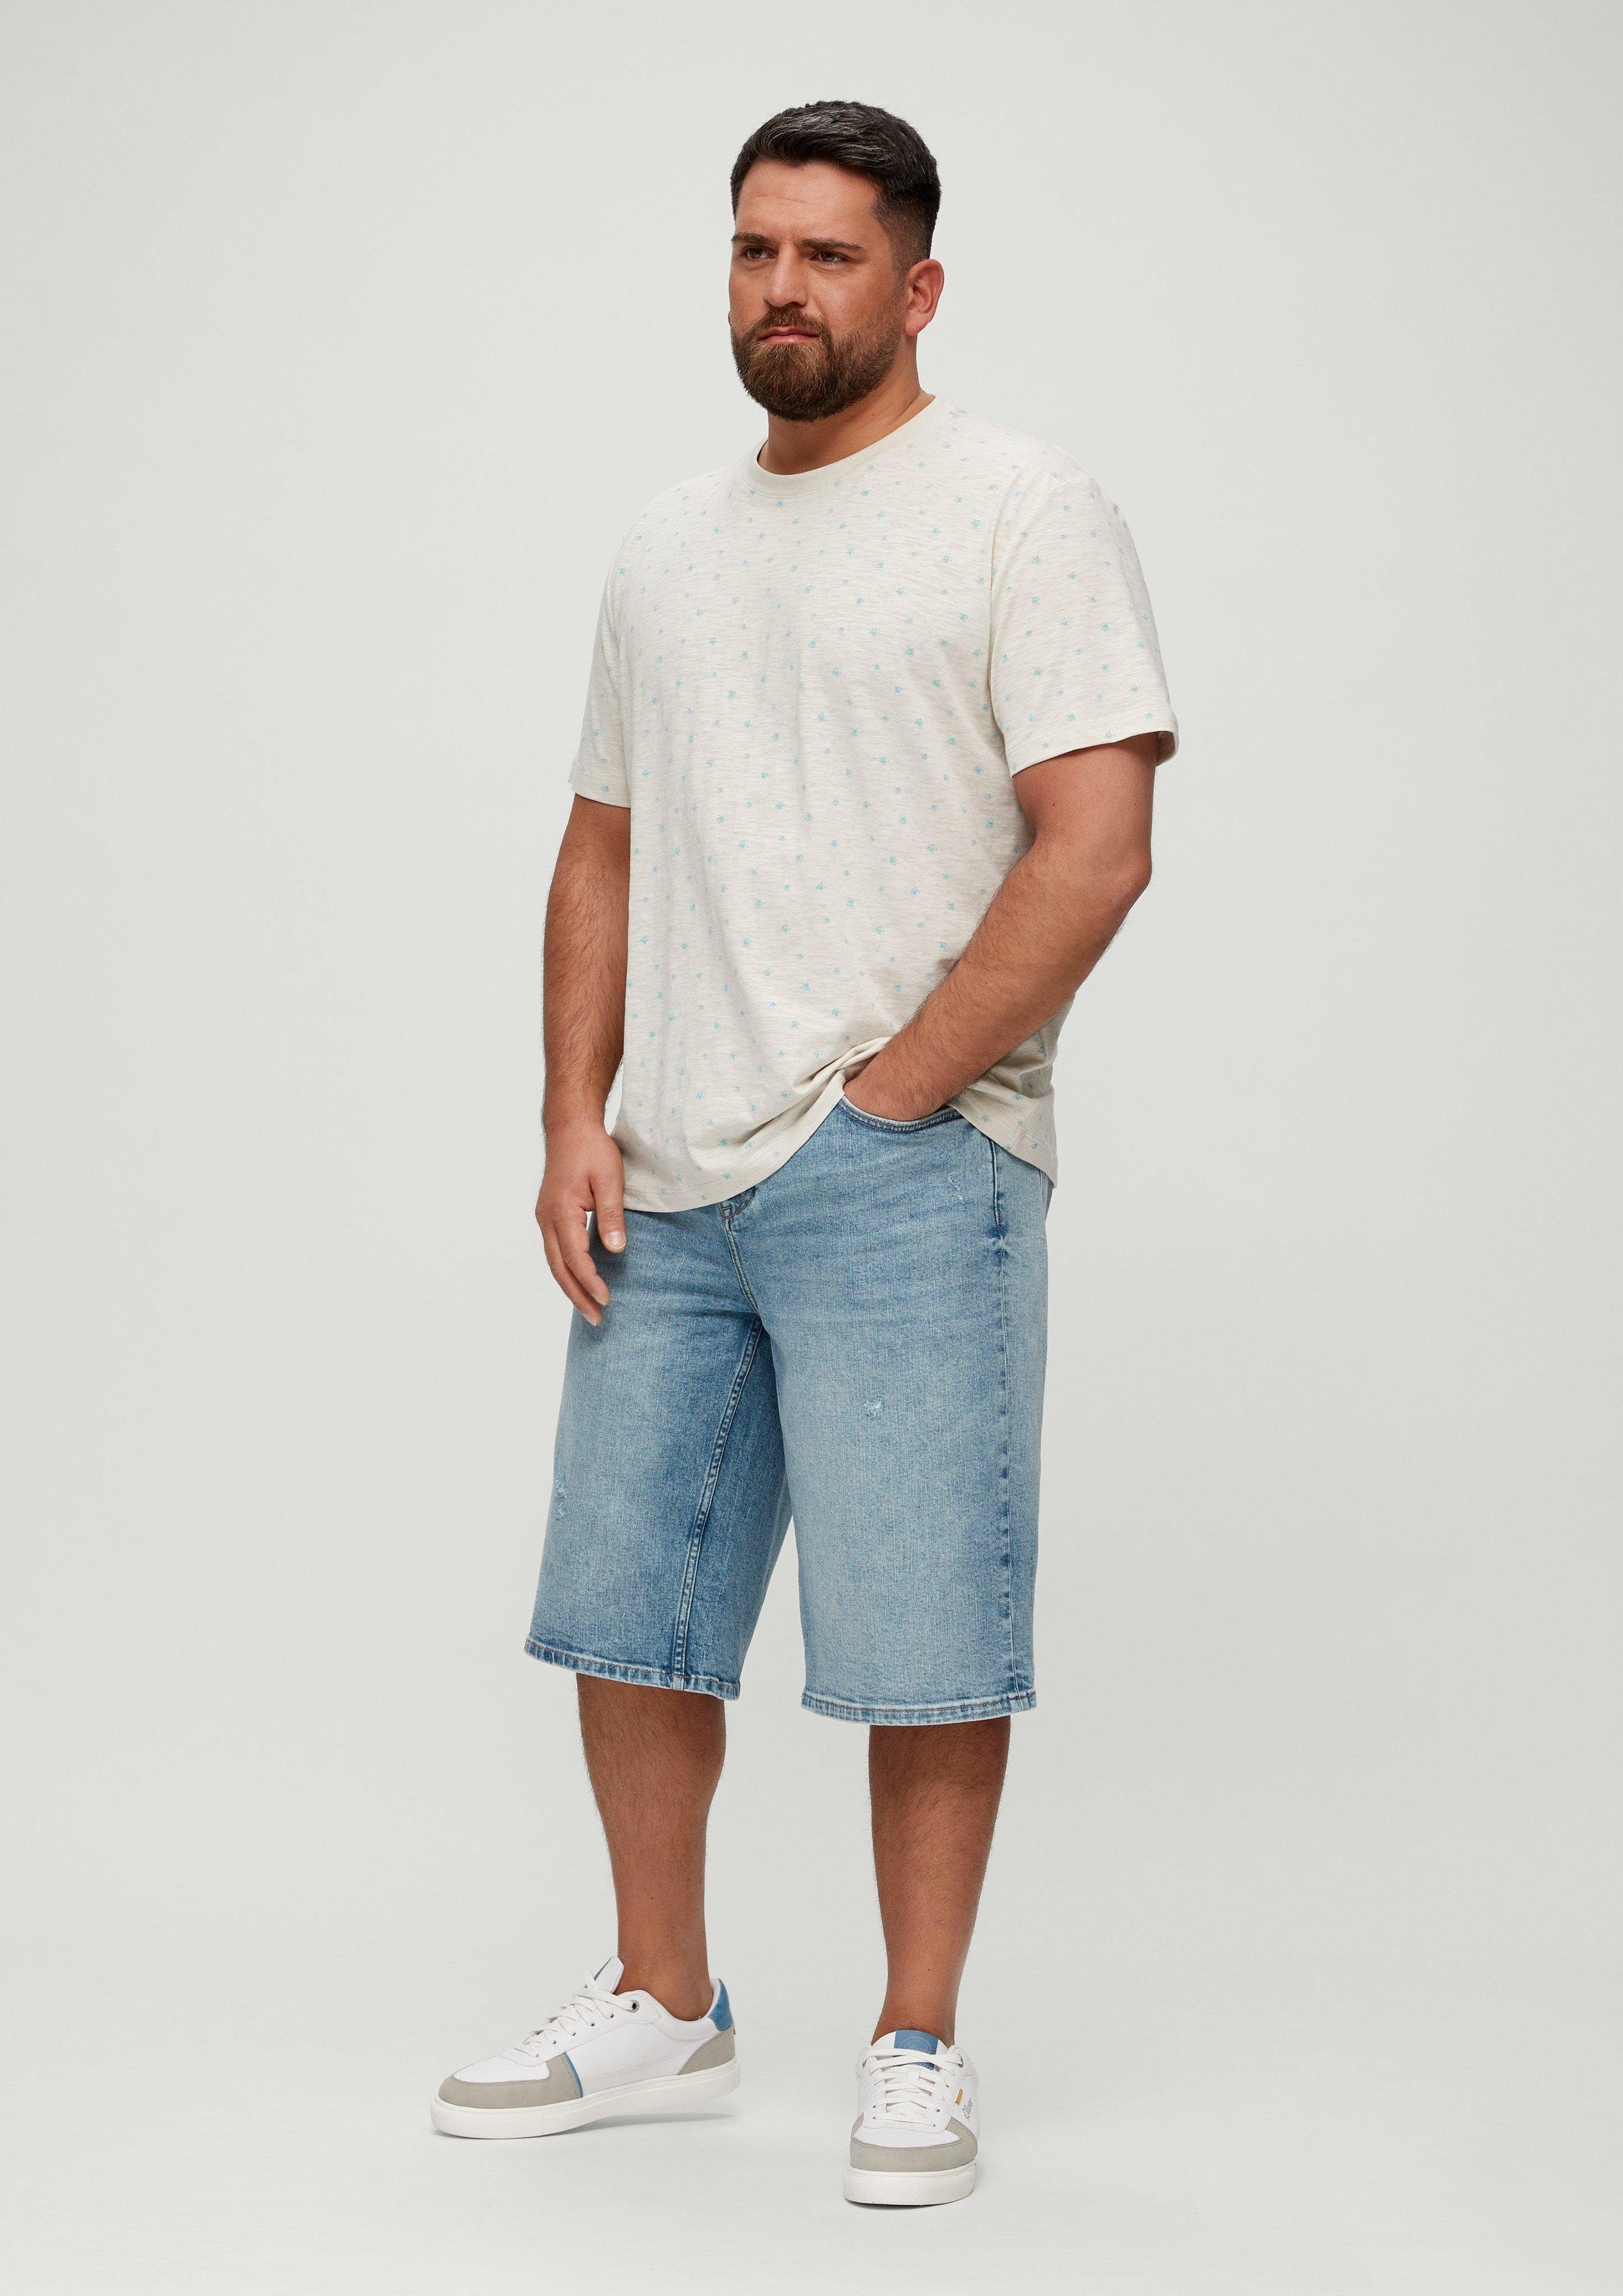 s.Oliver Jeansshorts Jeans-Bermuda Casby / Relaxed Fit / Mid Rise / Straight Leg Waschung